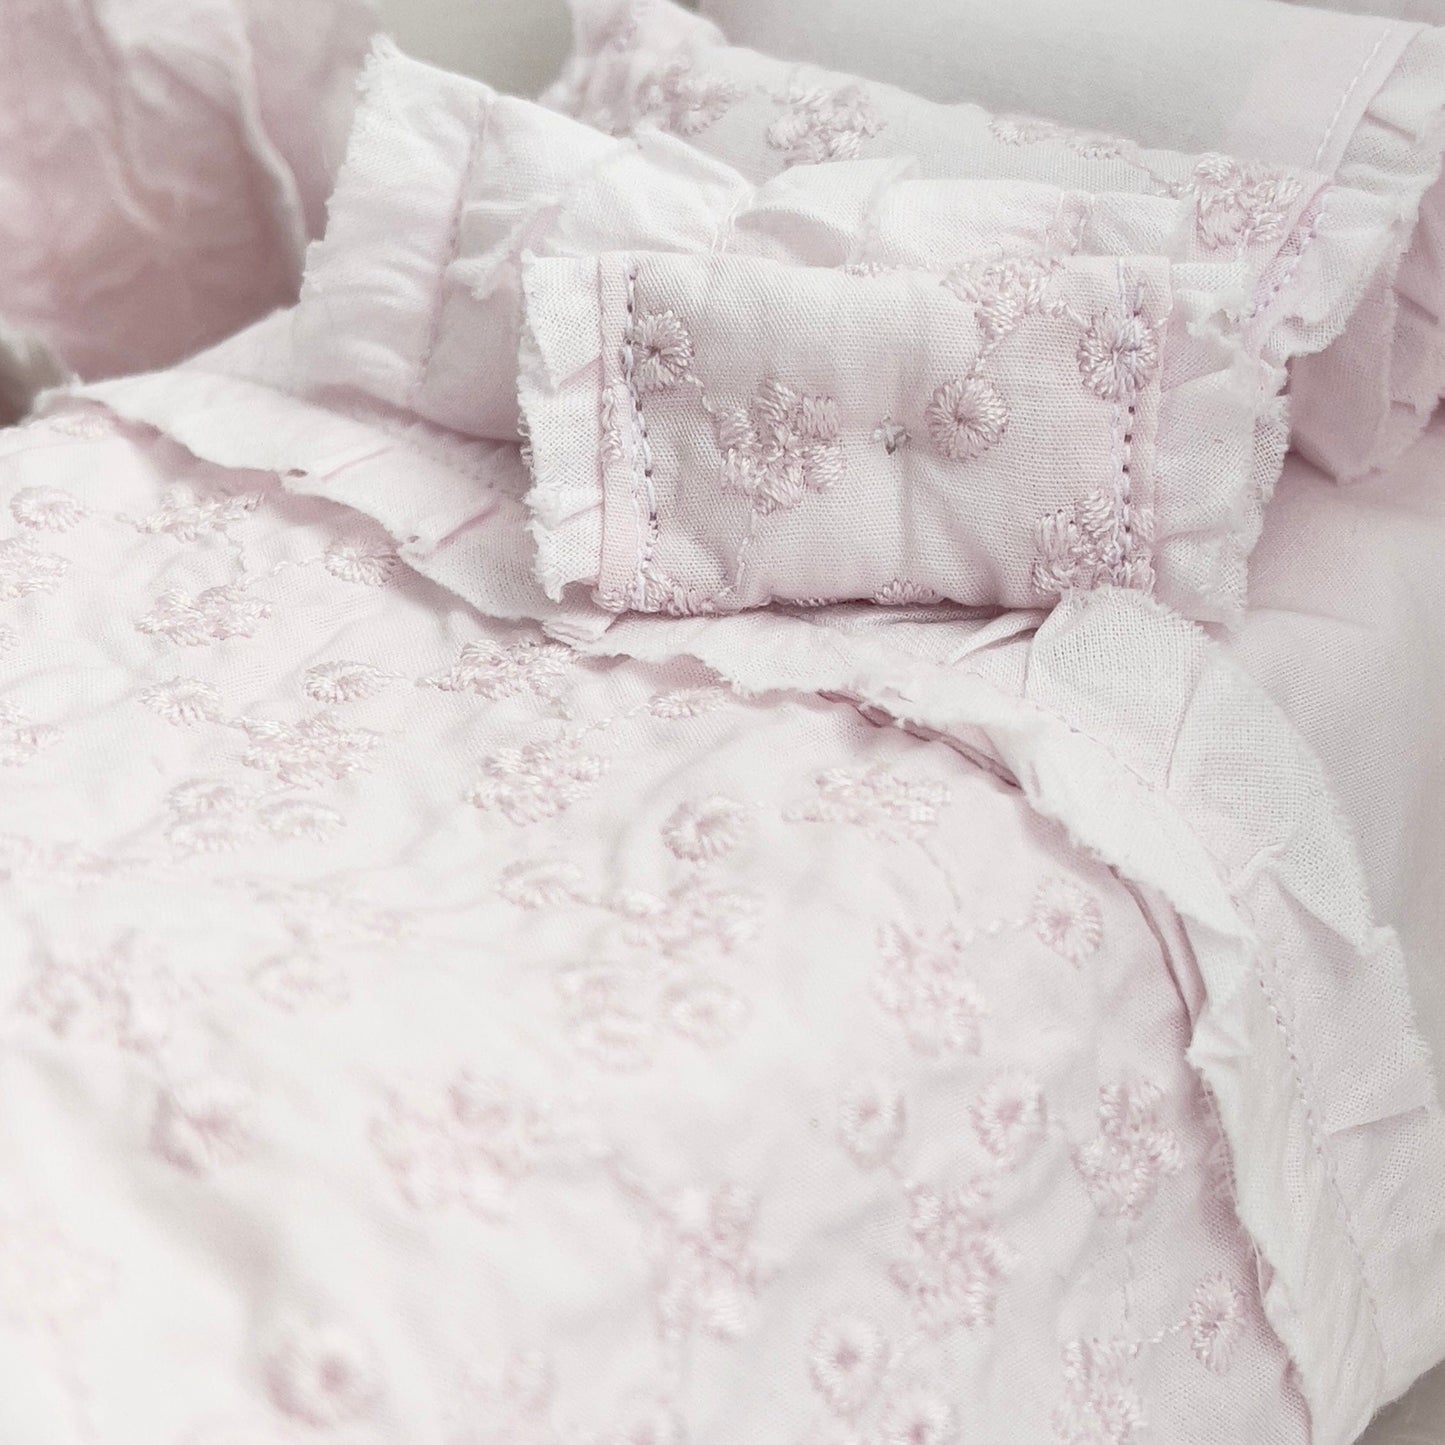 Chantallena Doll House Shabby Cottage |  Four Piece Pink Cotton Embroidered Bedding Set | Pink Embroidered